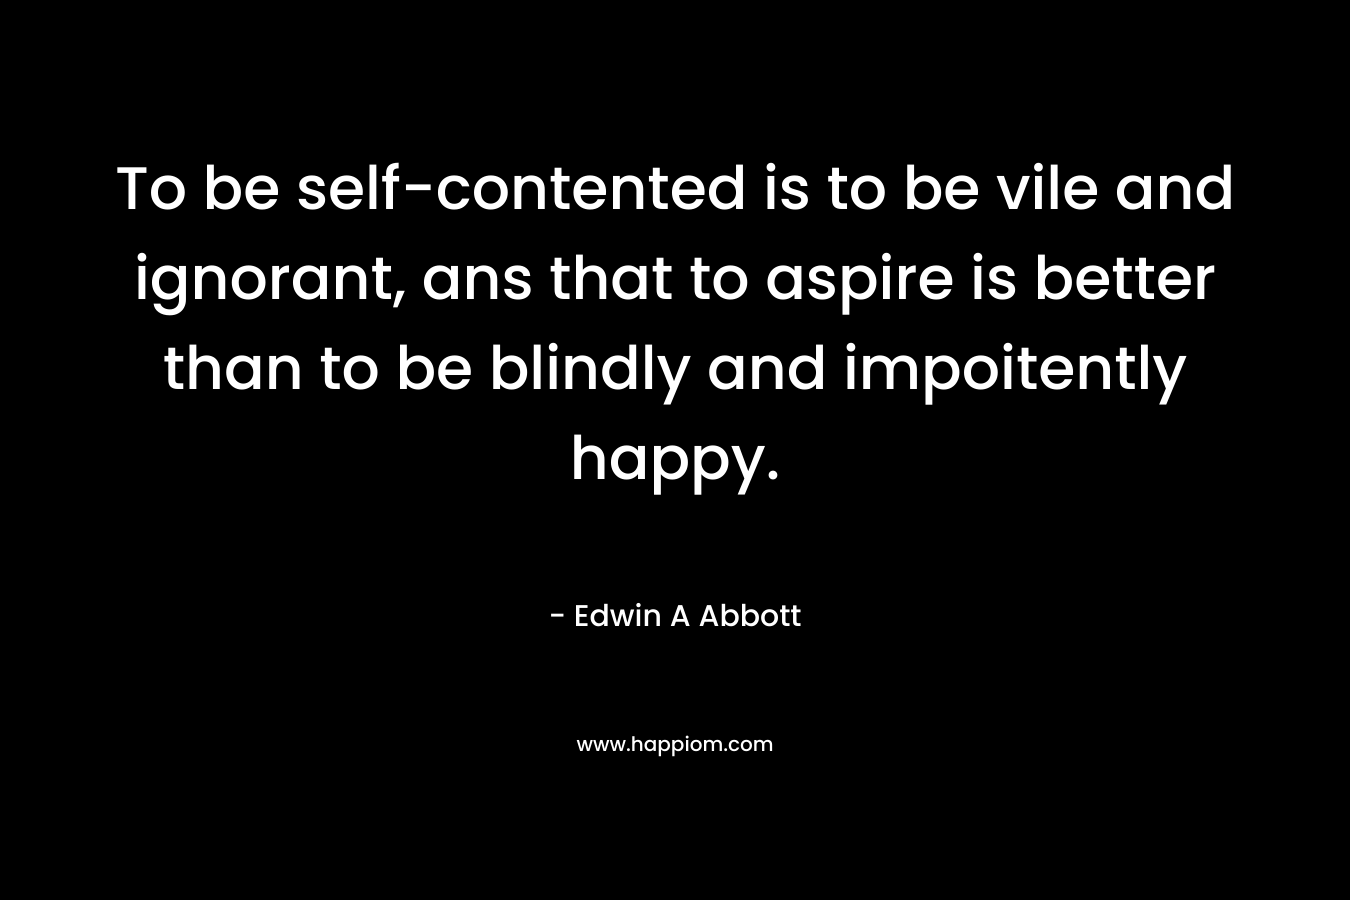 To be self-contented is to be vile and ignorant, ans that to aspire is better than to be blindly and impoitently happy. – Edwin A Abbott